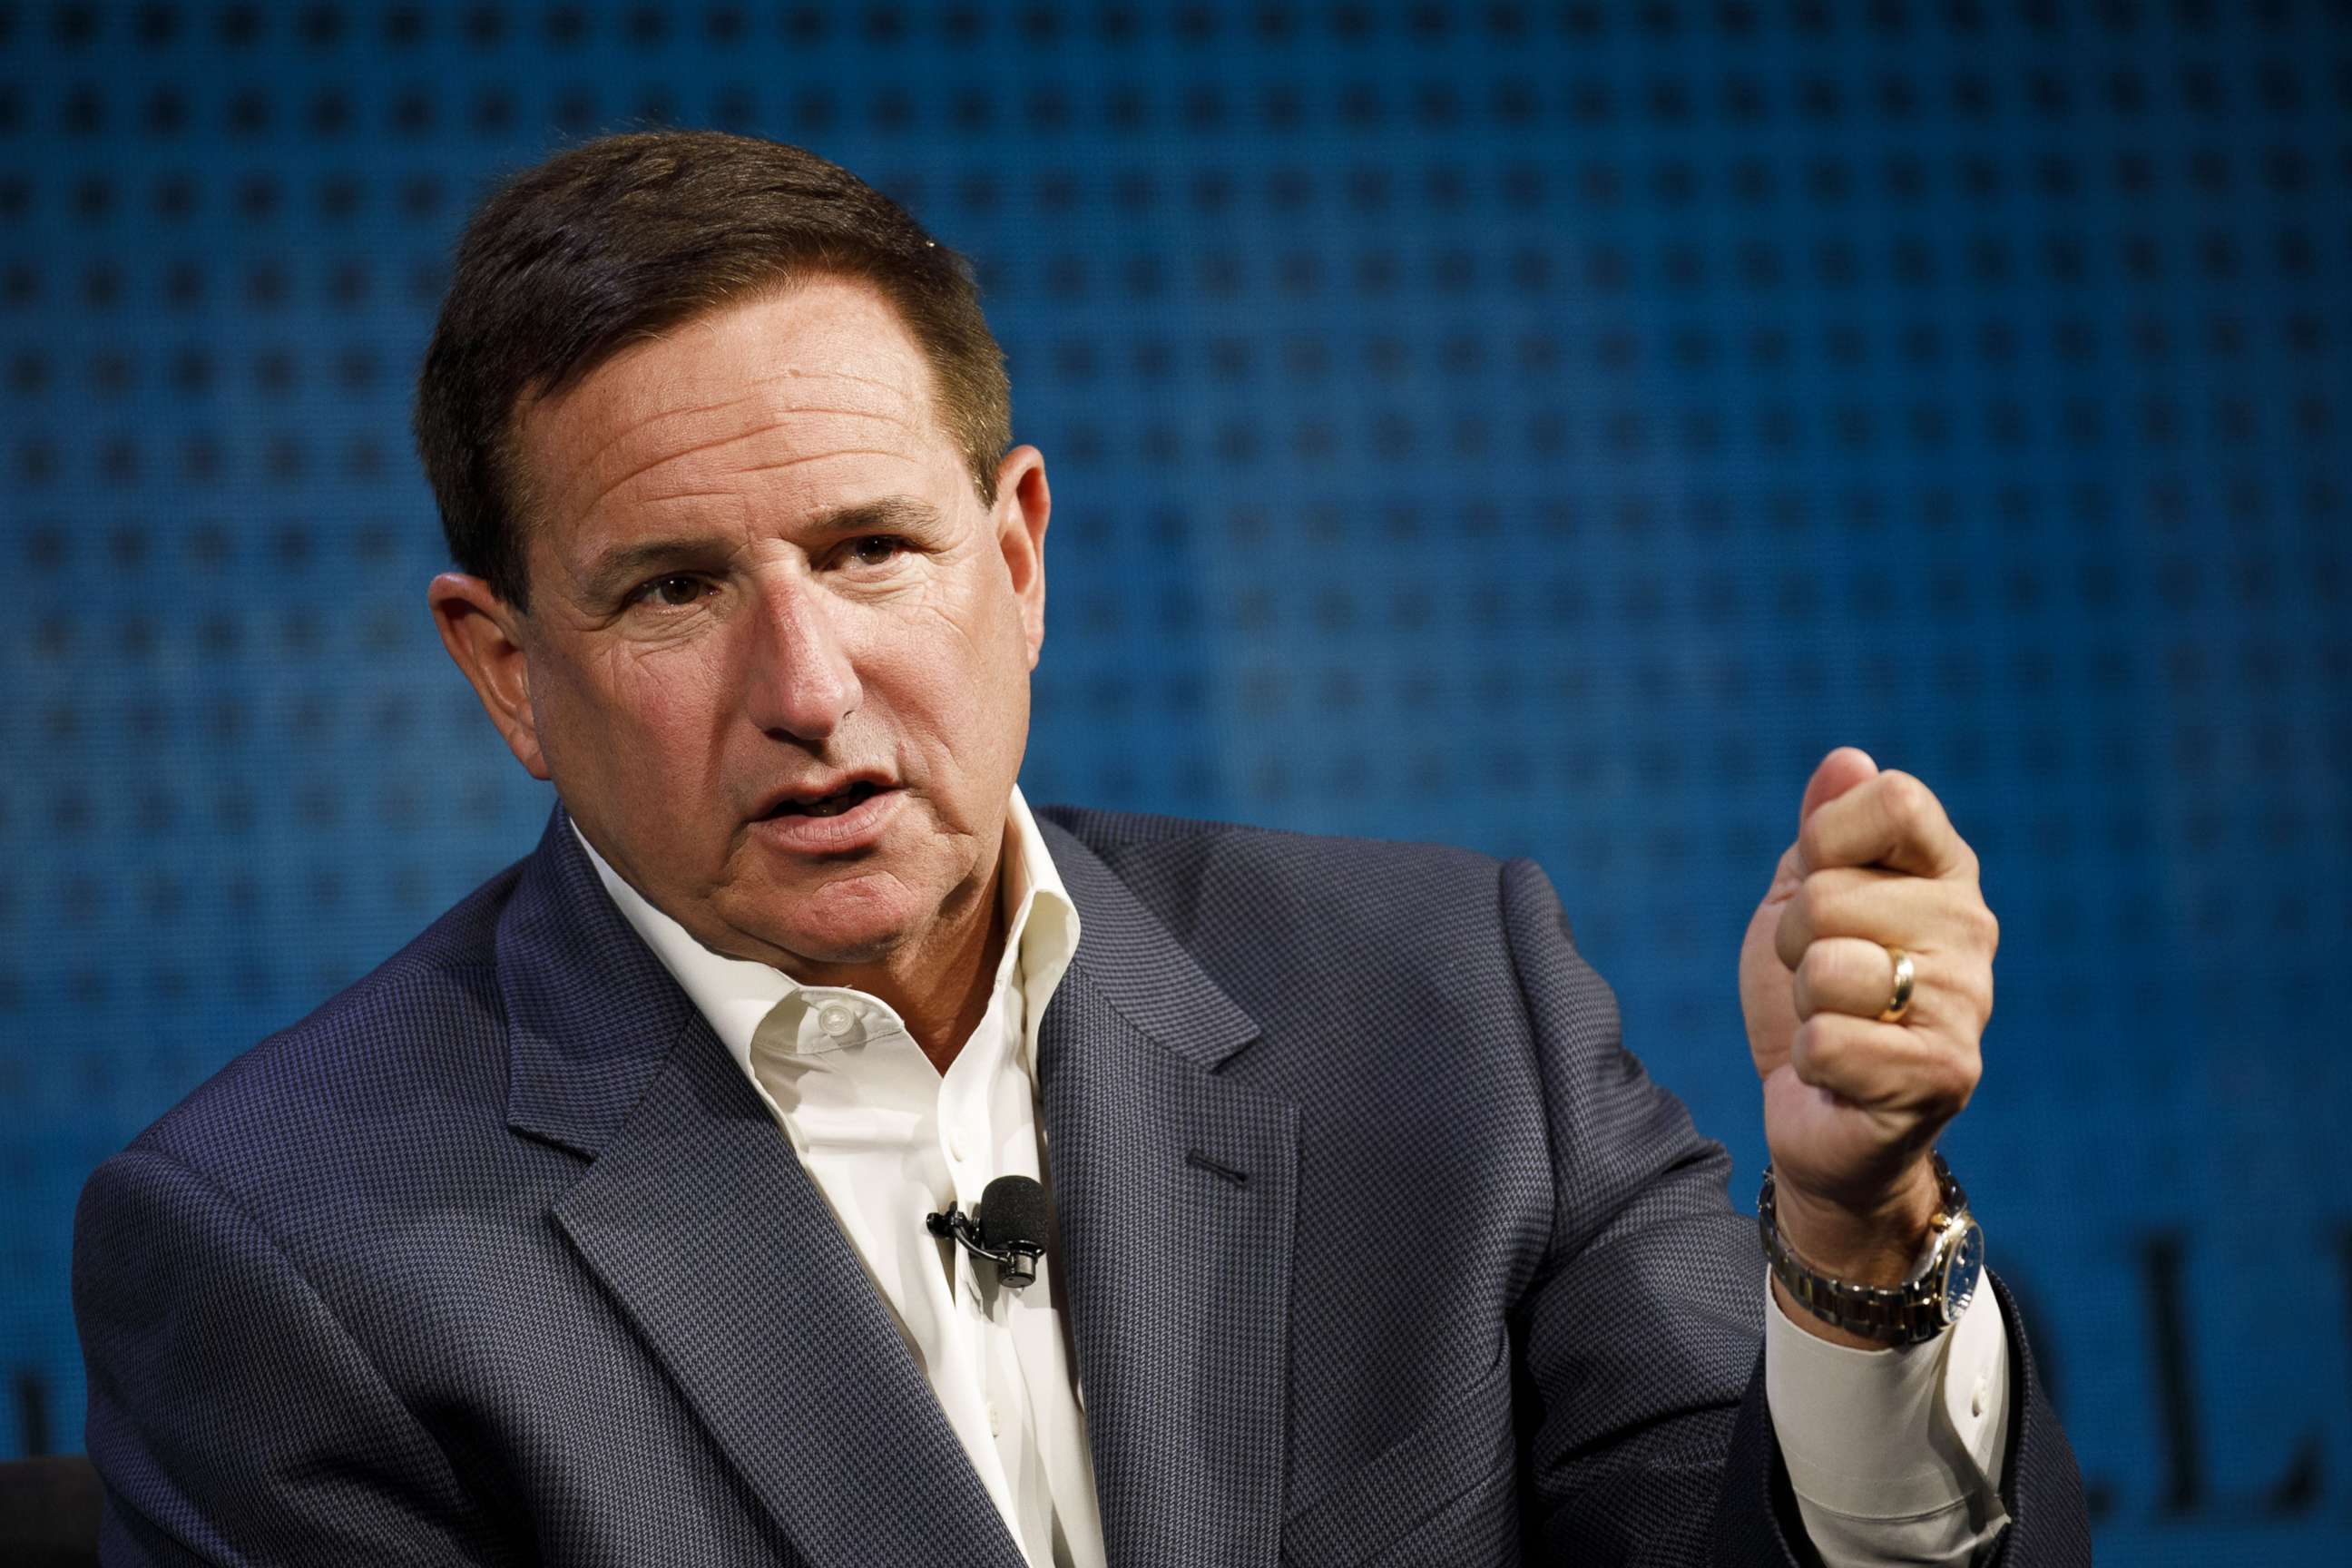 PHOTO: Mark Hurd speaks during the Wall Street Journal D.Live global technology conference in Laguna Beach, Calif., Oct. 18, 2017.